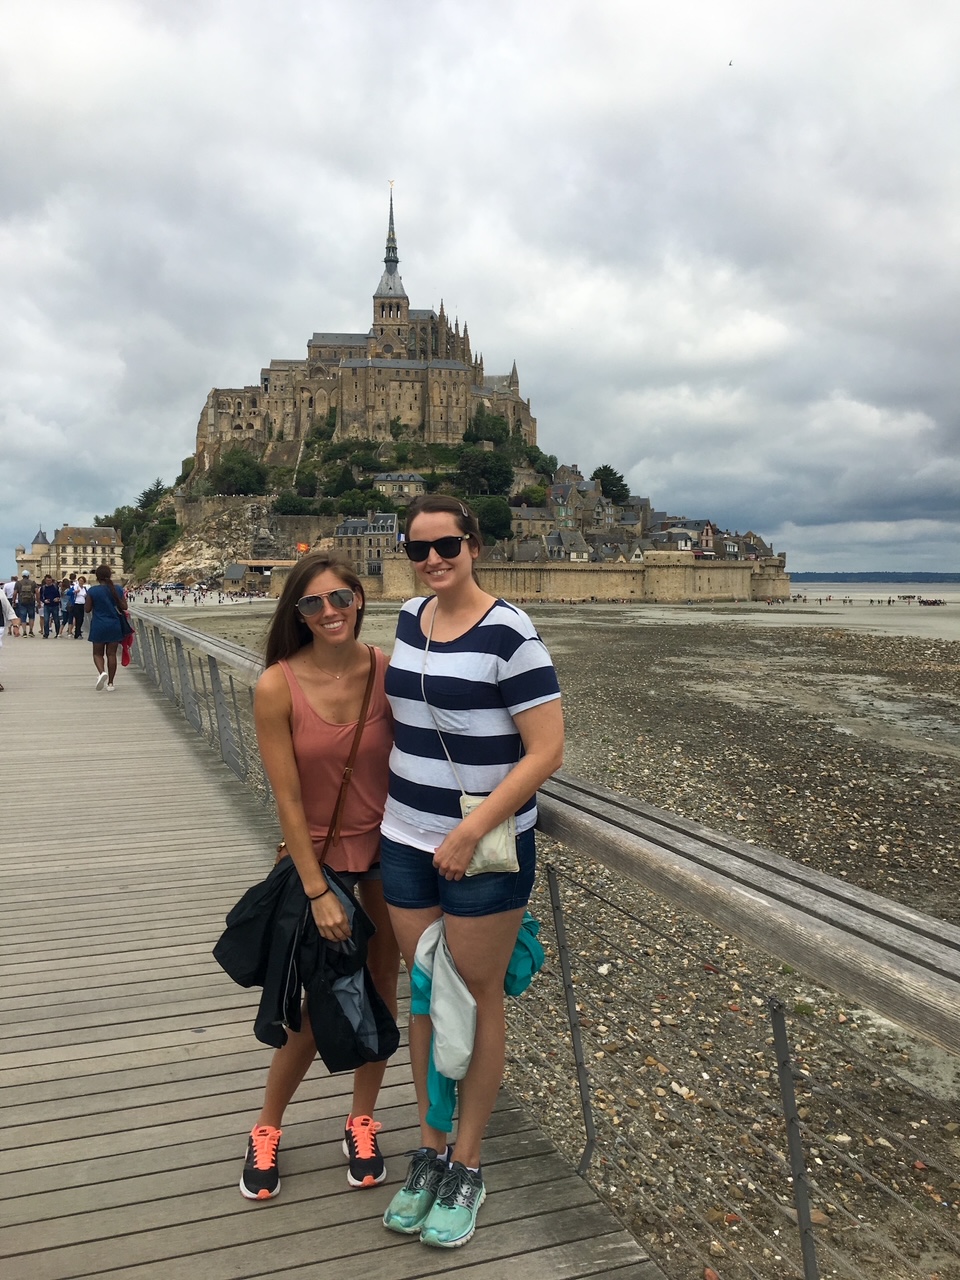 us in front of Mont Saint-Michel in Normandy, France